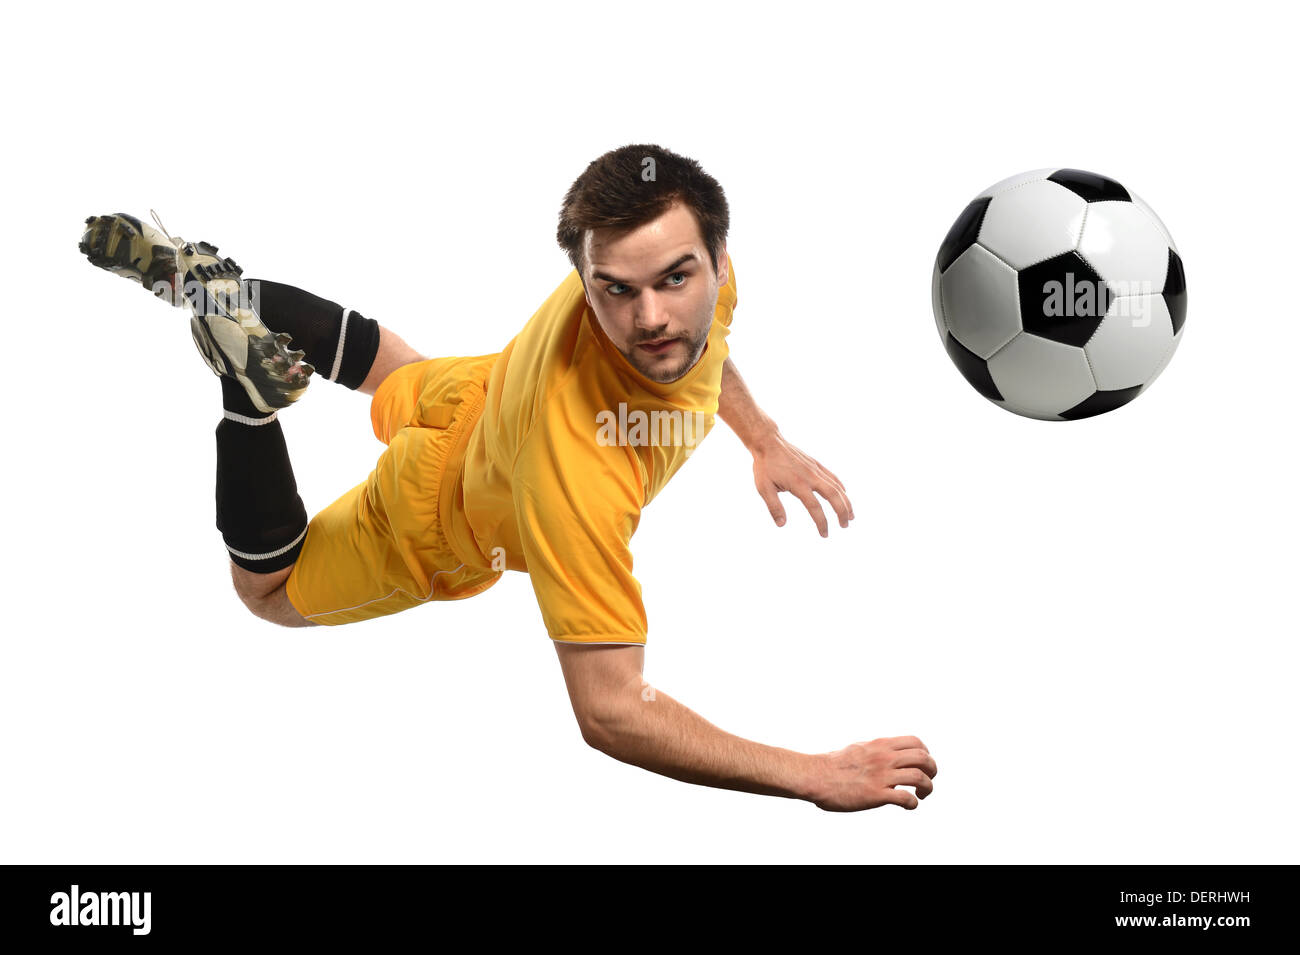 Joueur de foot ball cap isolated over white background Banque D'Images